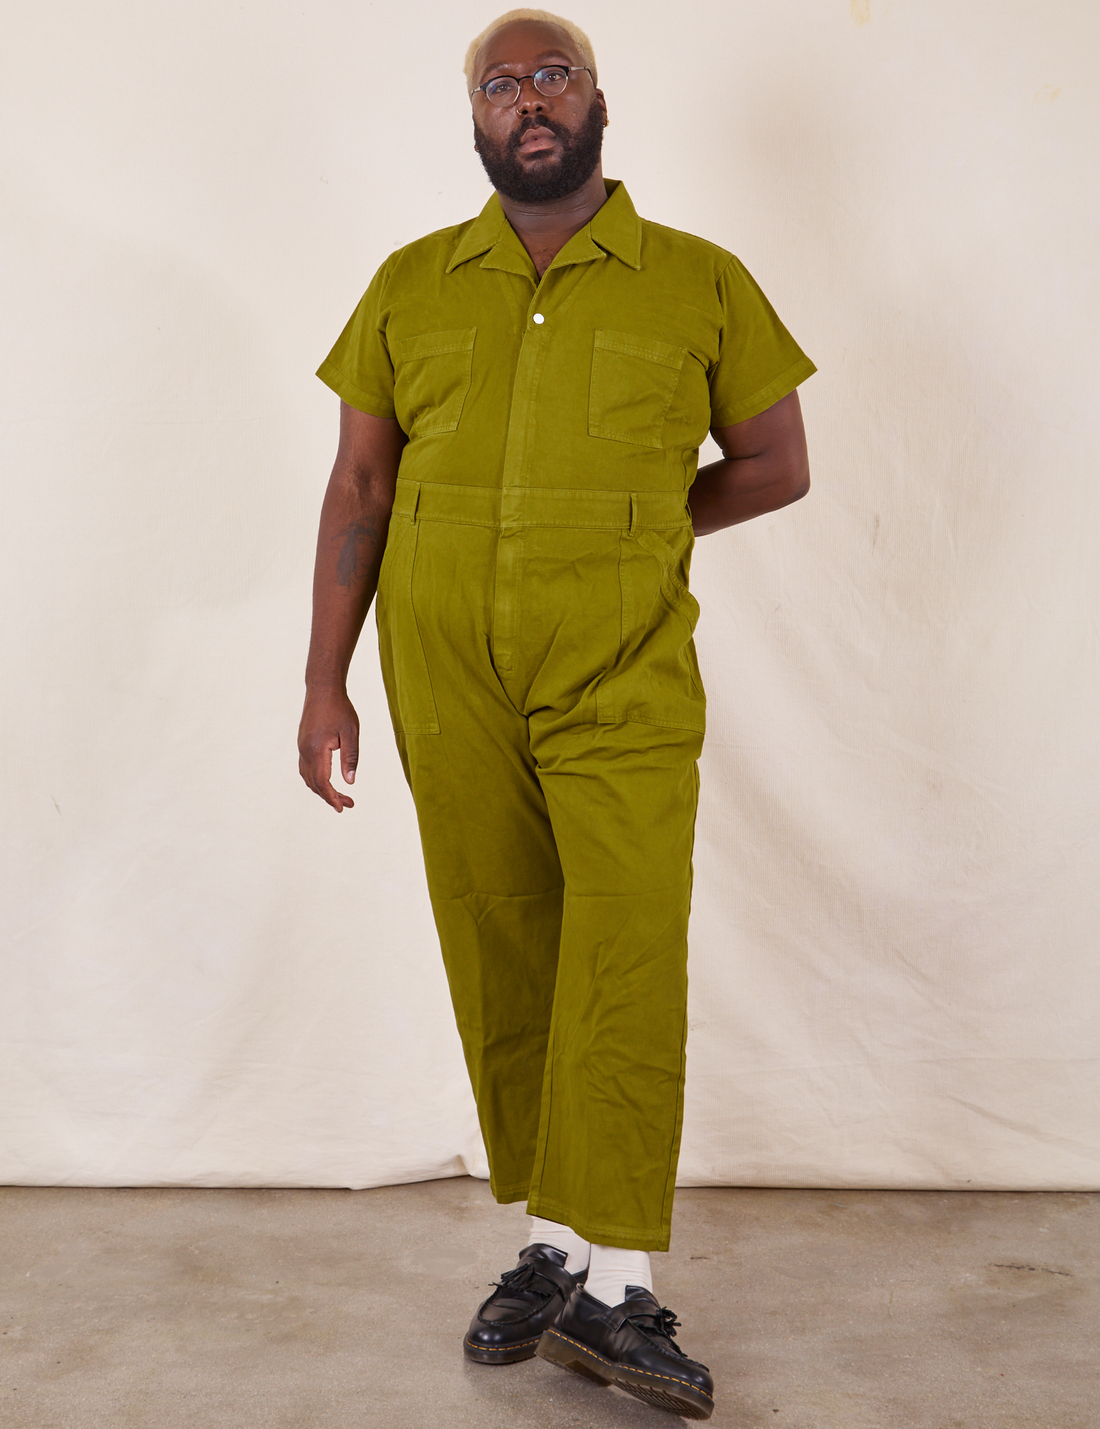 Elijah is 6'4" and wearing 4XL Short Sleeve Jumpsuit in Olive Green